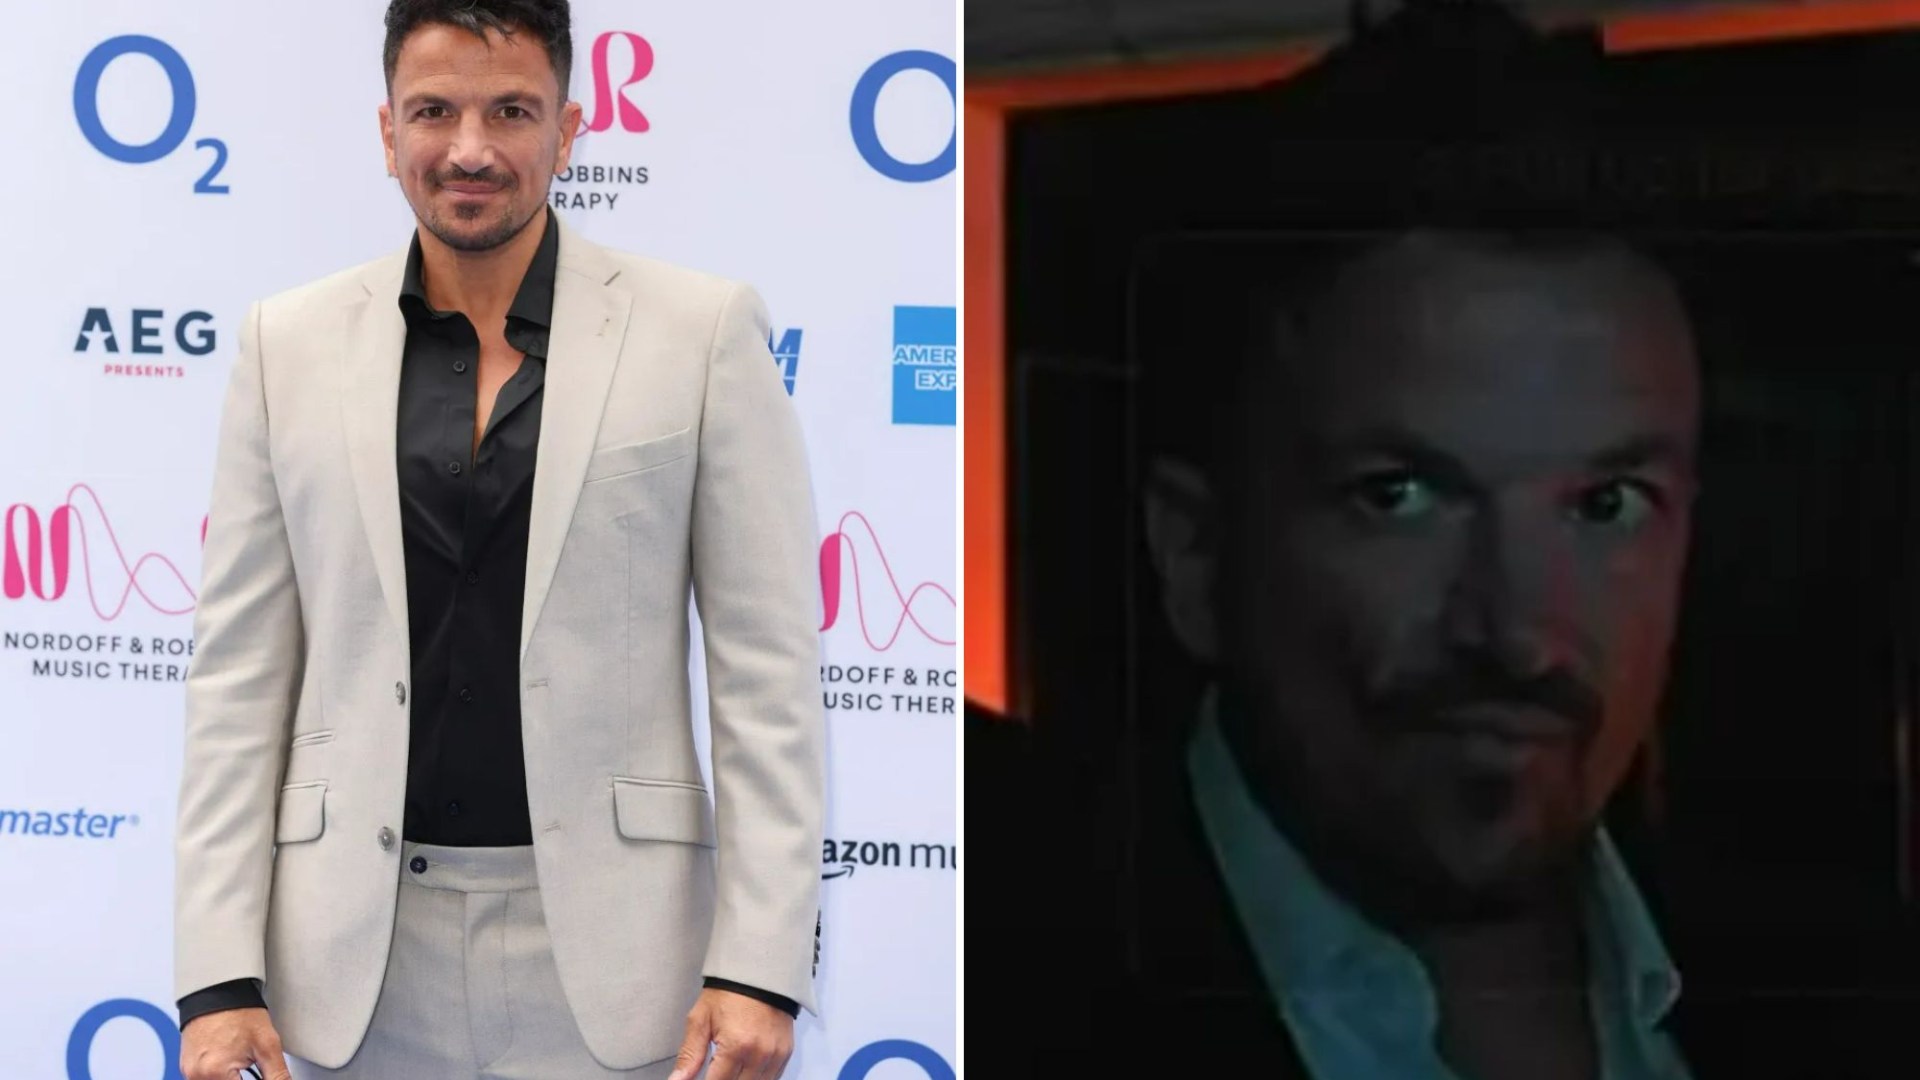 Peter Andre lands huge acting role in 